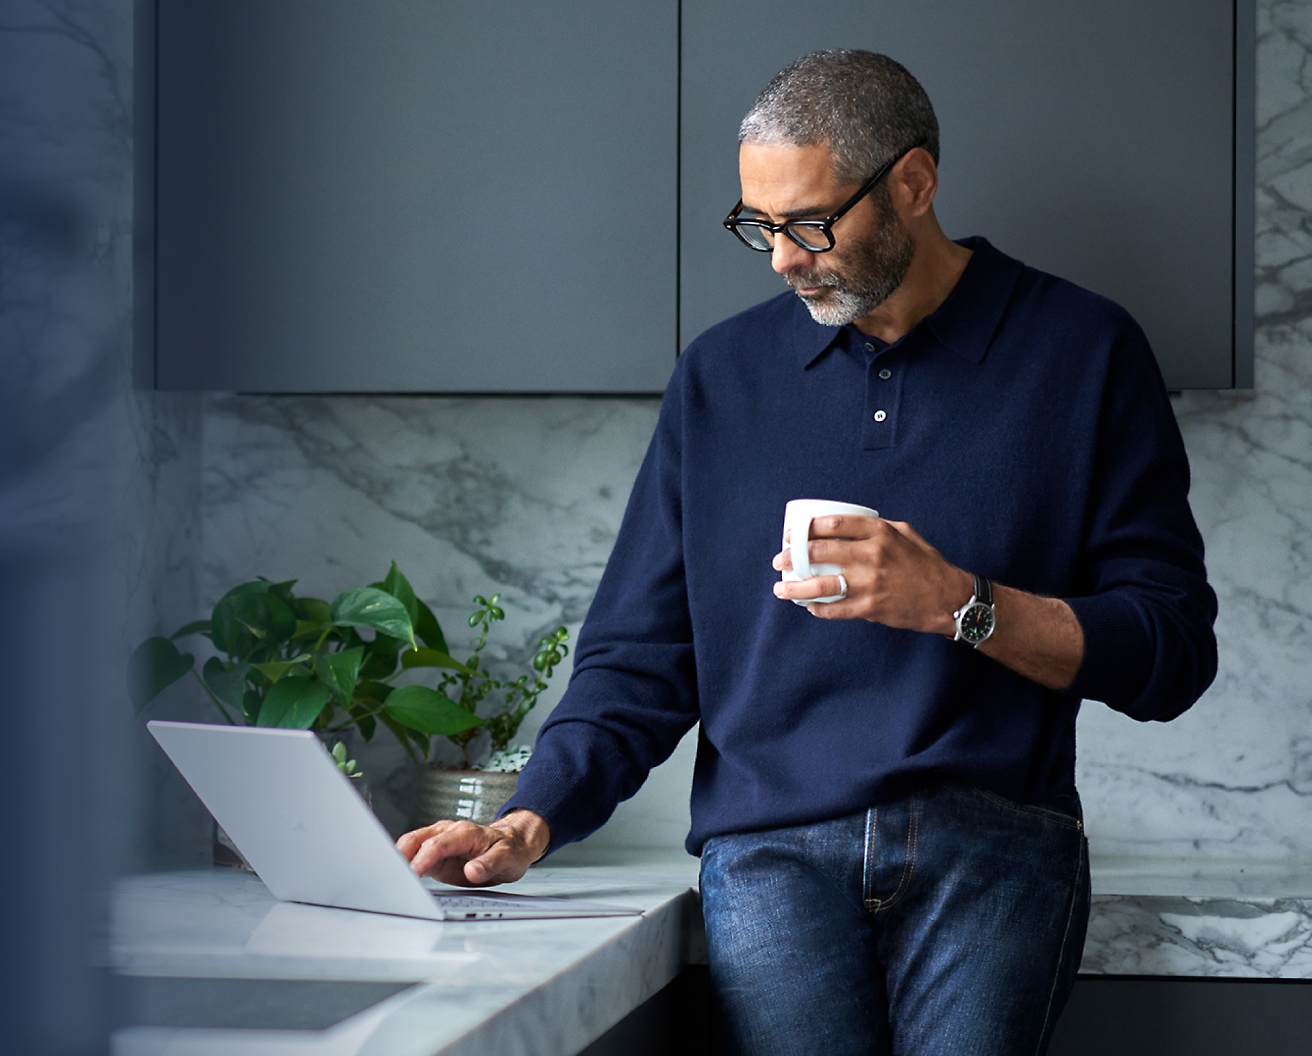 A middle-aged man with glasses, wearing a blue sweater, uses a laptop and holds a coffee mug in a modern kitchen.